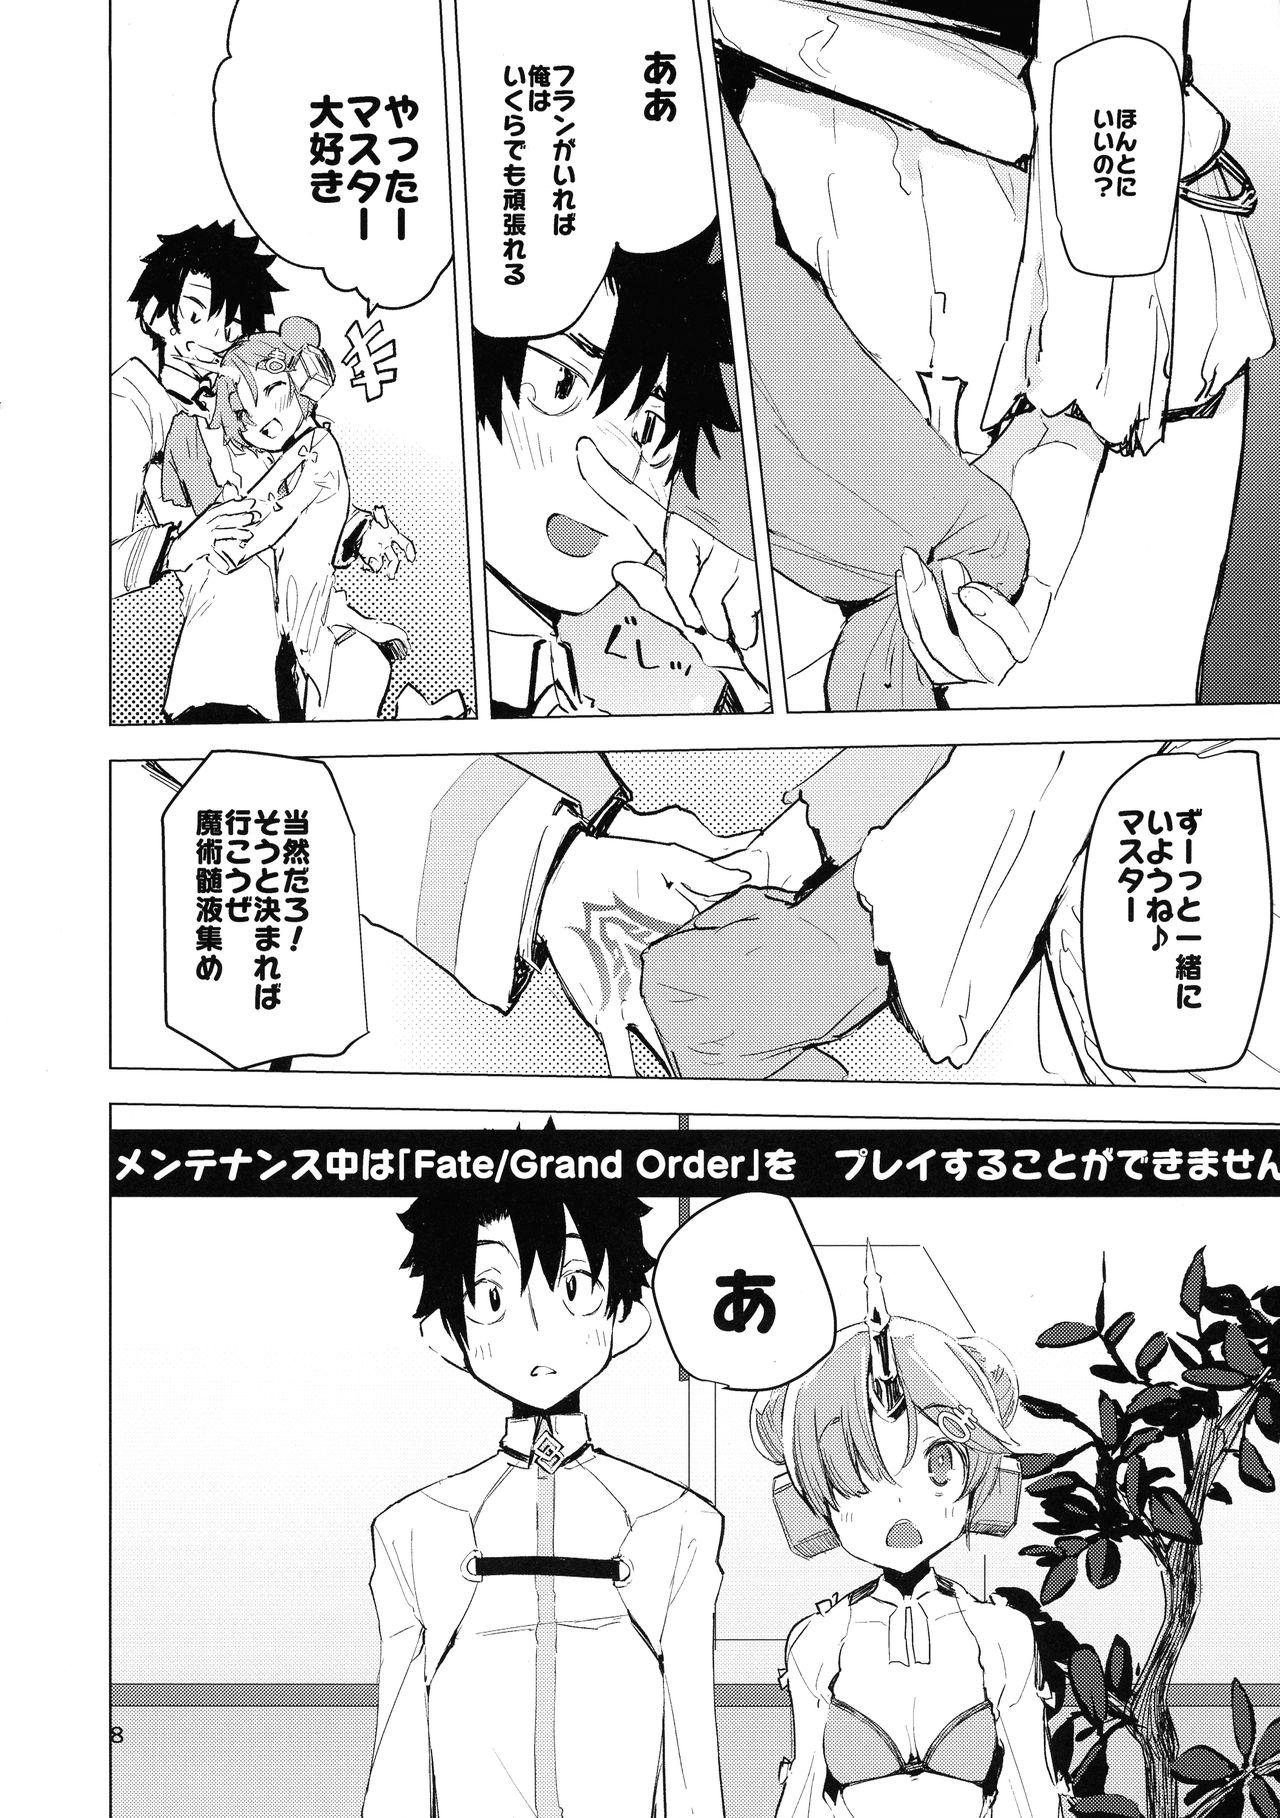 Euro I Love Franken - Fate grand order Cams - Page 8